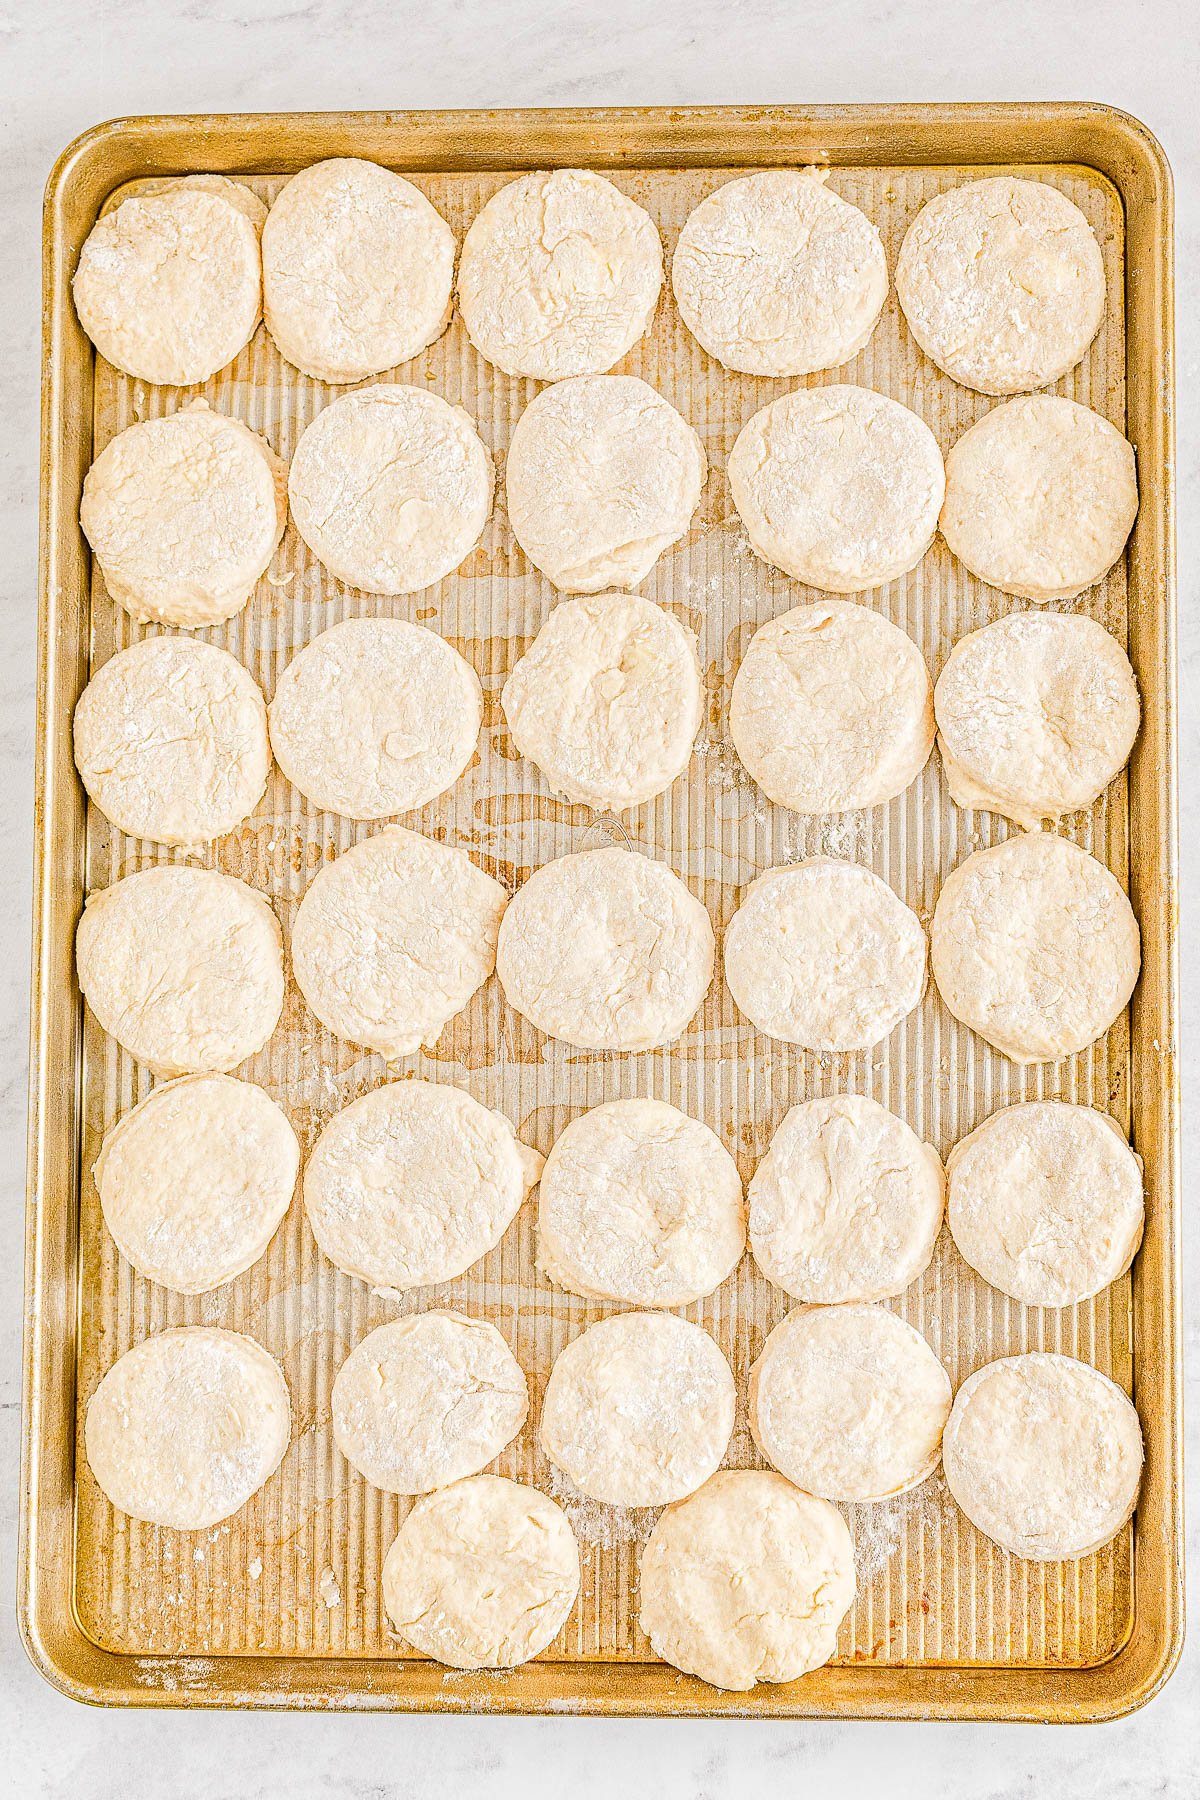 Angel Biscuits - The lightest, fluffiest, flakiest, melt-in-your-mouth biscuits you'll ever eat! Thanks to a trio of leavening agents, plenty of butter, and buttermilk, these EASY biscuits will become a family FAVORITE in no time! Serve them in place of regular biscuits or dinner rolls, or make them for a special brunch or holiday meal, and I promise no one will eat just one!